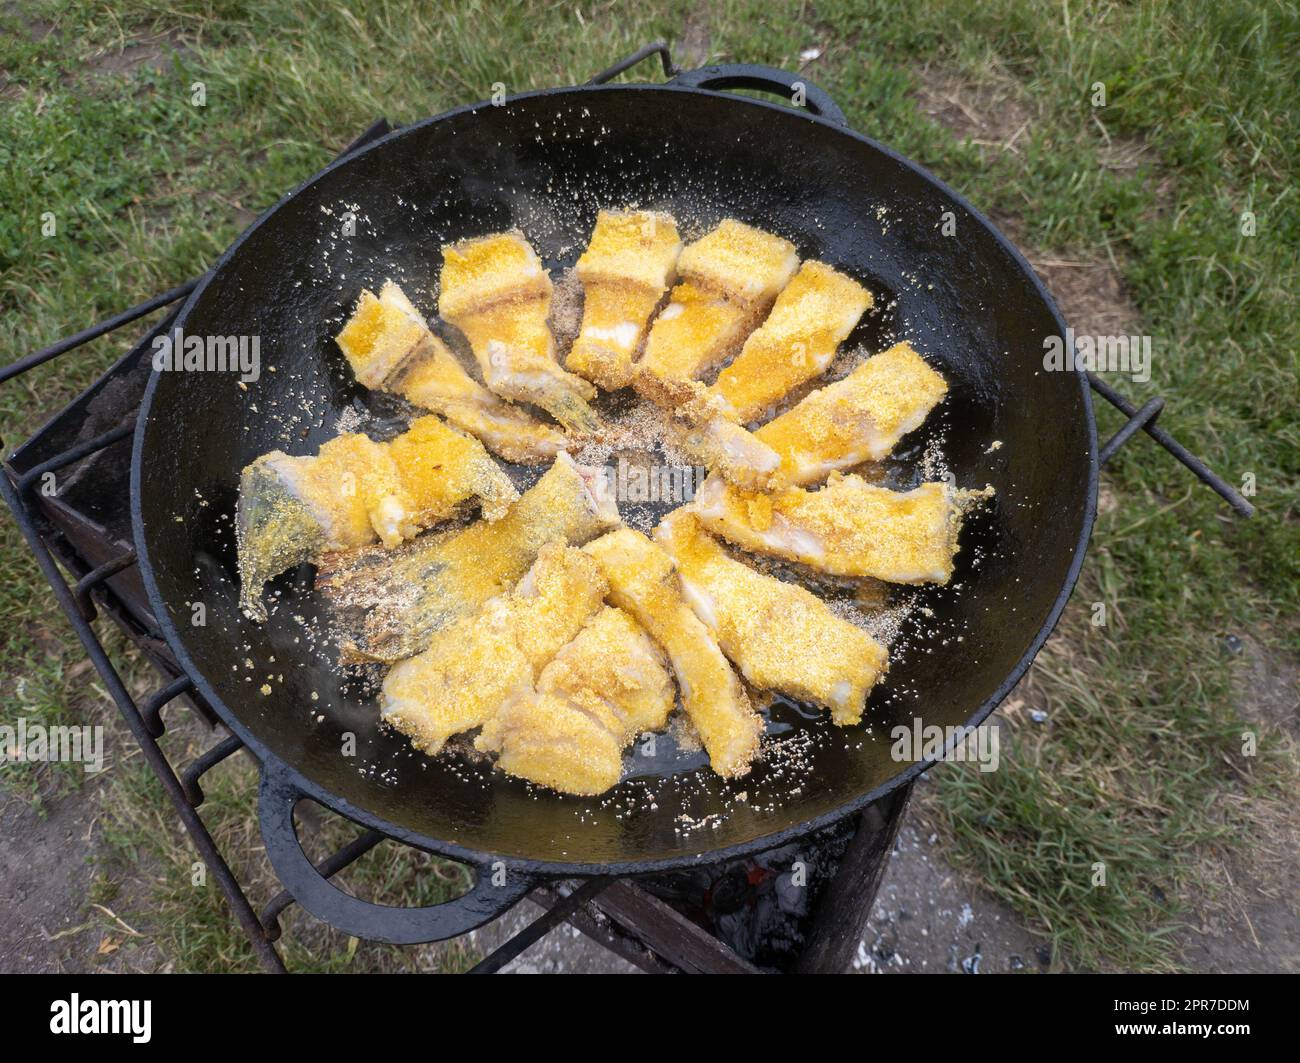 Roasting pike in a pan on fire. Small crispy pieces of fish are fried in oil. The concept of cooking food in nature. Shallow depth of field. Stock Photo